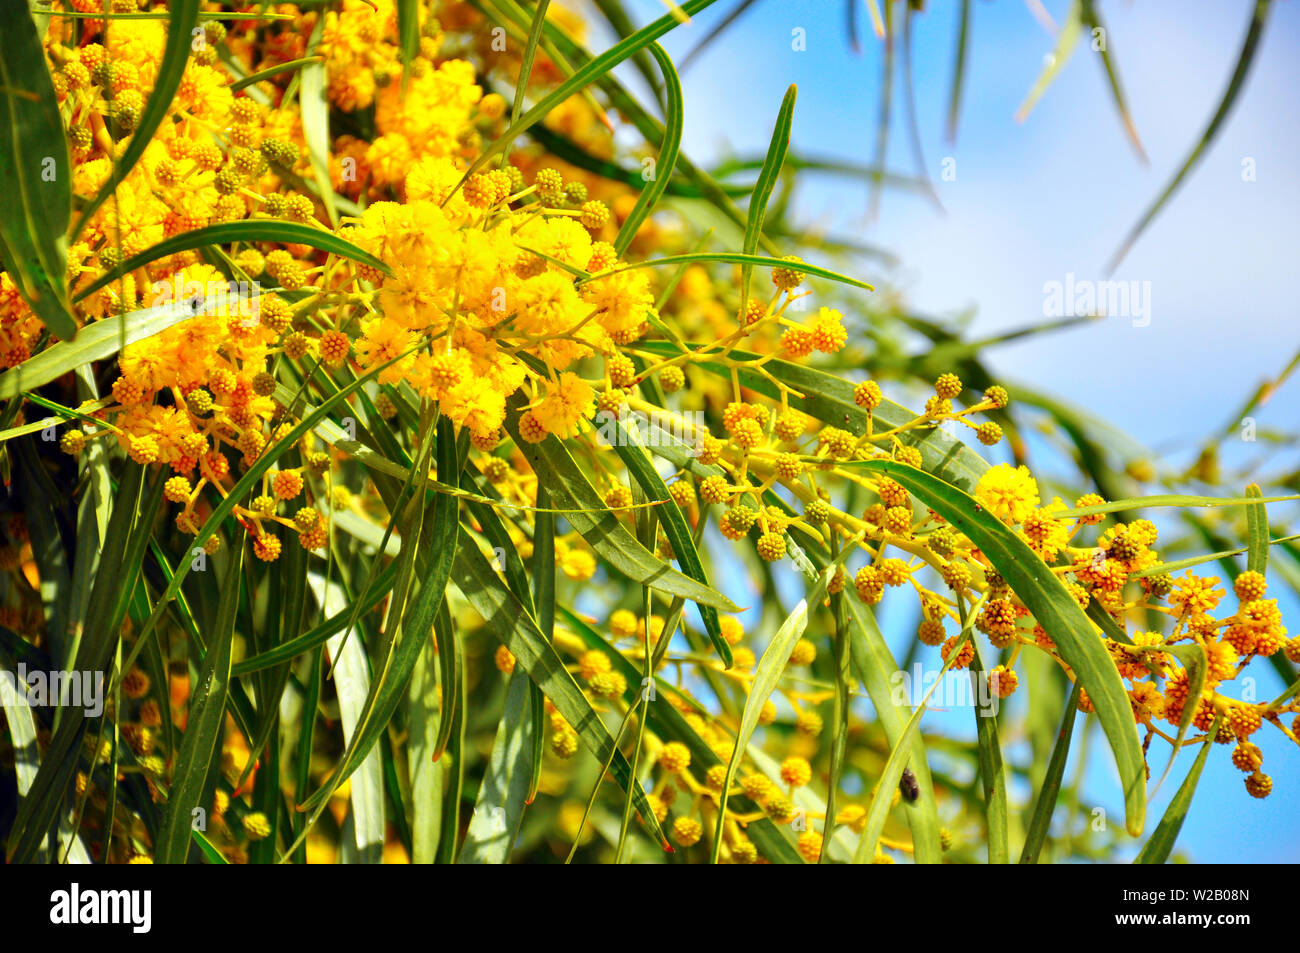 Acacia Pycnantha Golden Wattle Australian Floral Emblem That Flowers In Late Winter And Spring Producing A Mass Of Fragrant Fluffy Golden Flowers Stock Photo Alamy